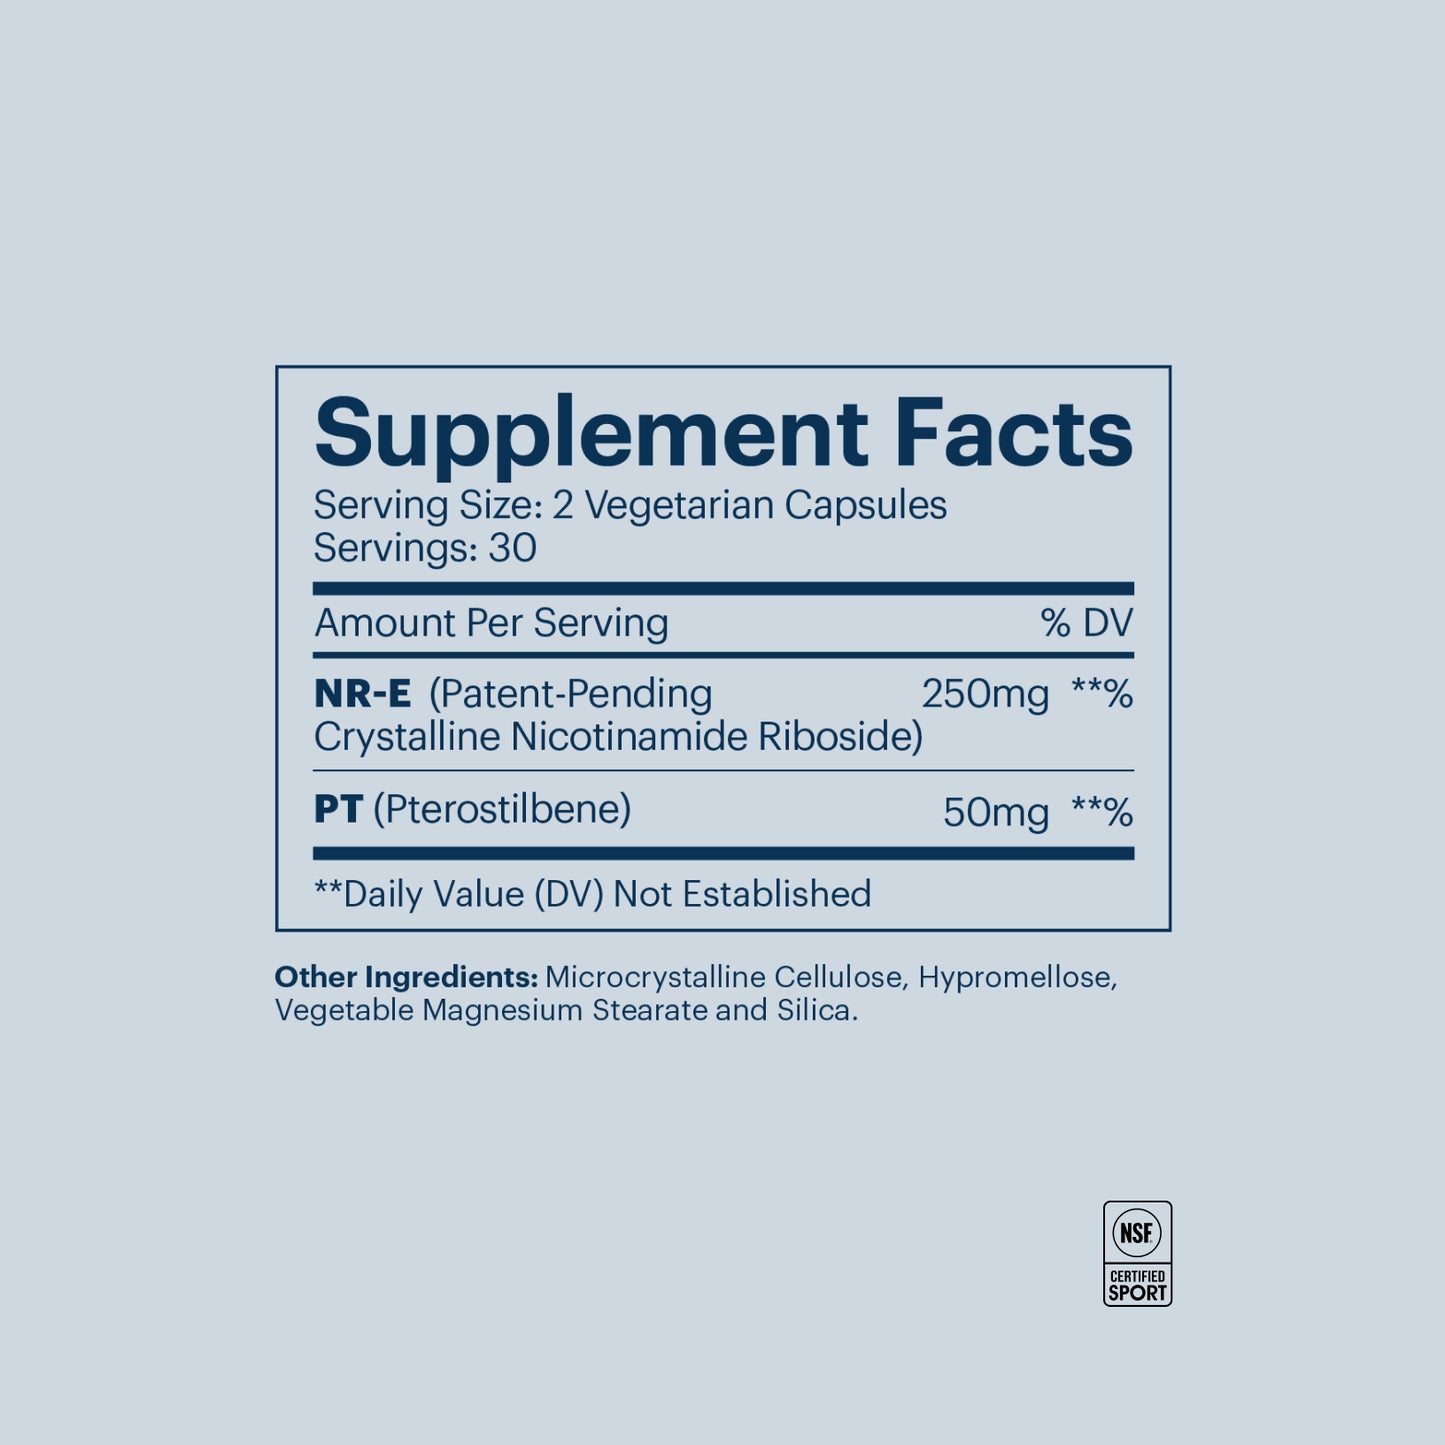  Analyzing image     BasisSupplementFacts_1  1632 × 1632px  Supplement Facts[text in image]Supplement Facts